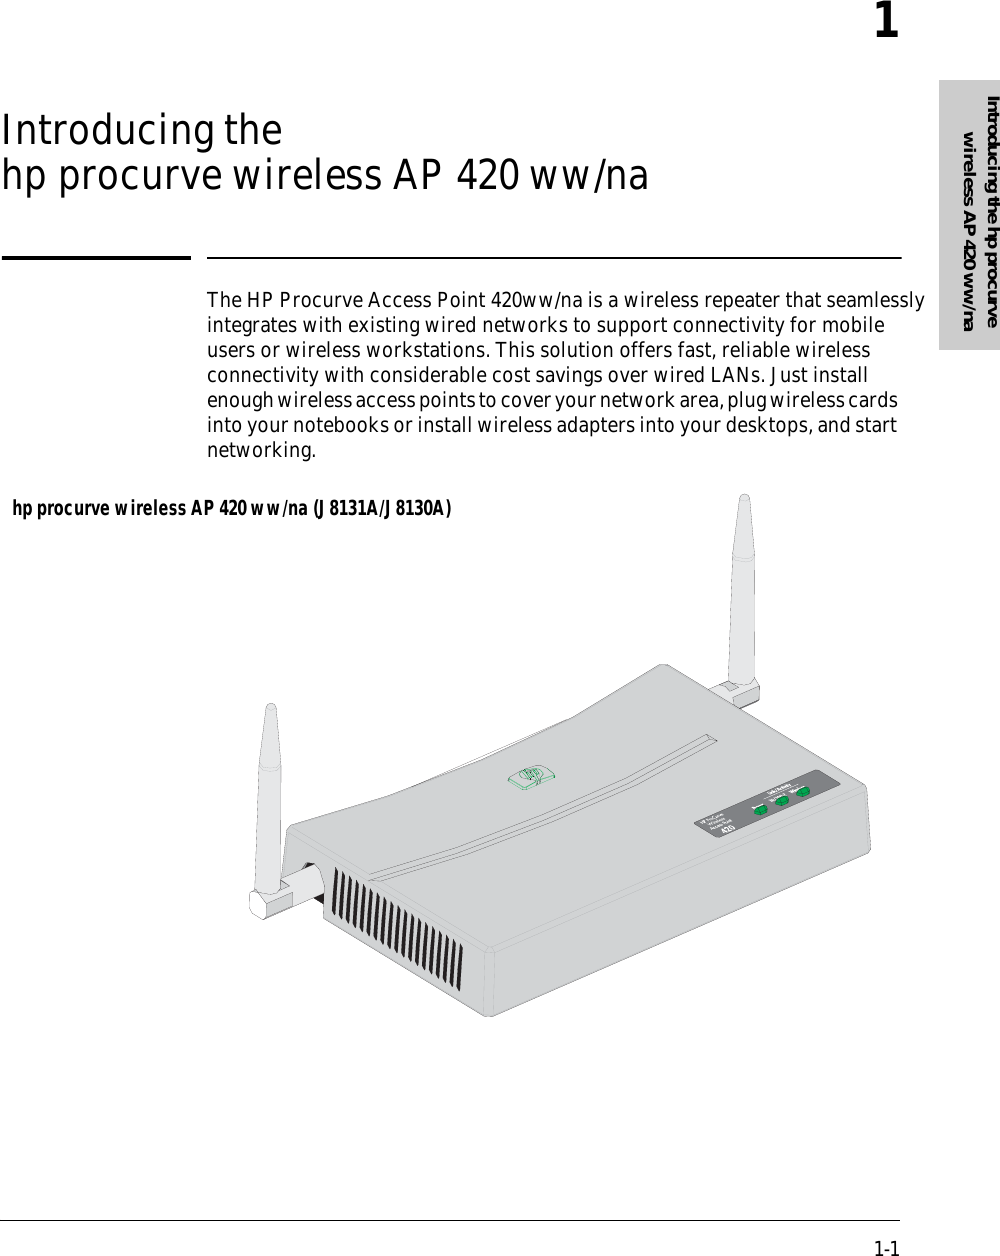 1-1Introducing the hp procurve wireless AP 420 ww/na1Introducing the  hp procurve wireless AP 420 ww/naThe HP Procurve Access Point 420ww/na is a wireless repeater that seamlessly integrates with existing wired networks to support connectivity for mobile users or wireless workstations. This solution offers fast, reliable wireless connectivity with considerable cost savings over wired LANs. Just install enough wireless access points to cover your network area, plug wireless cards into your notebooks or install wireless adapters into your desktops, and start networking.hp procurve wireless AP 420 ww/na (J8131A/J8130A)